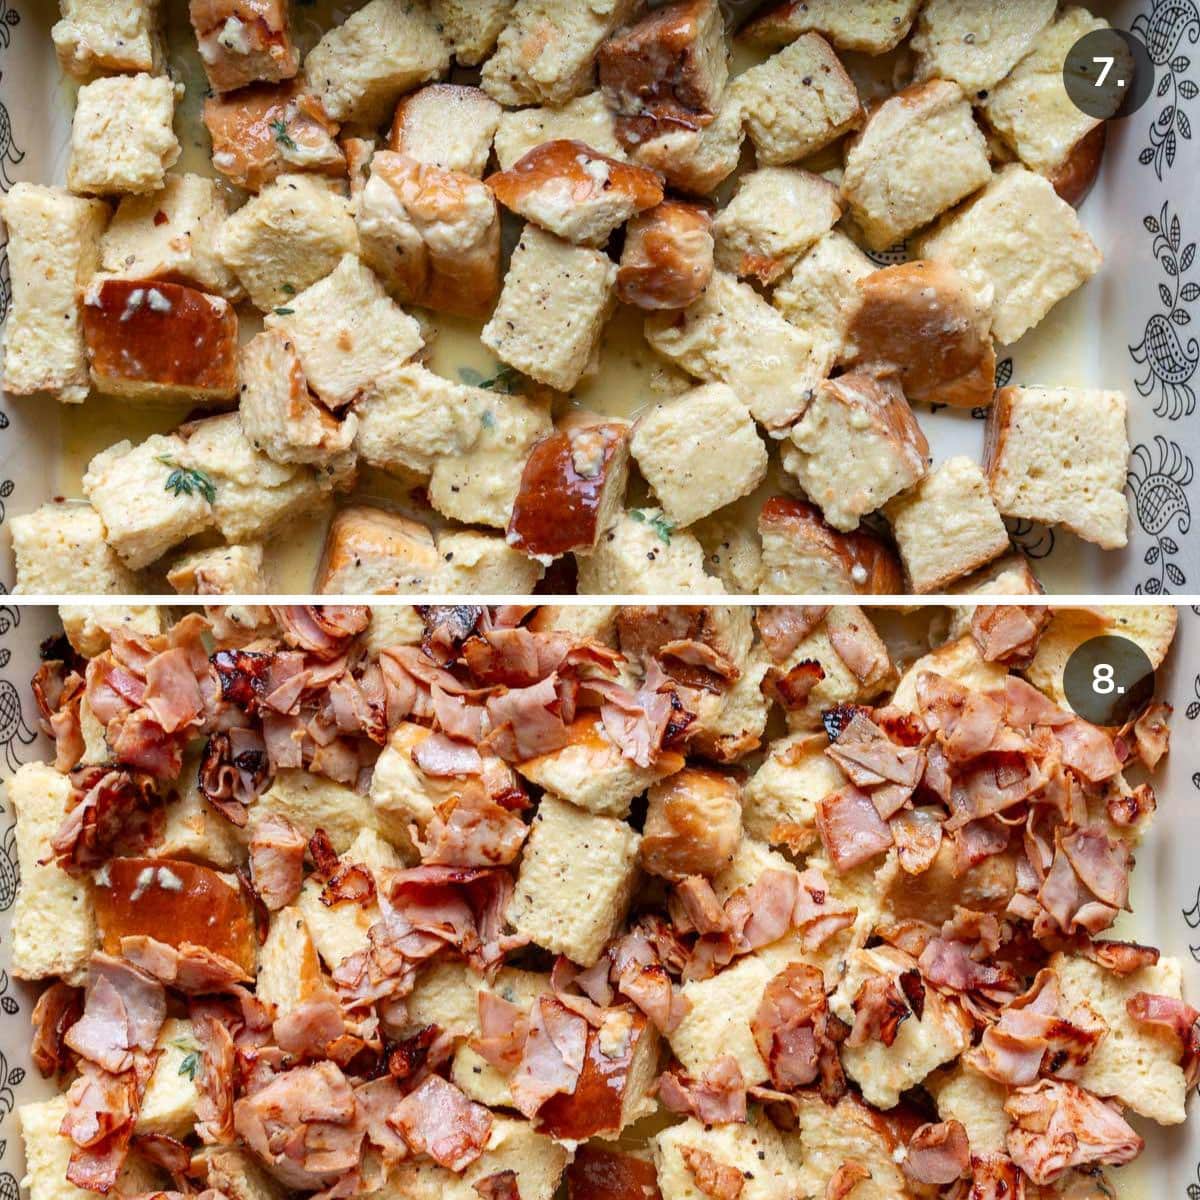 In a 9 x 13 baking dish soaked bread cubes and topped with sauteed ham. 